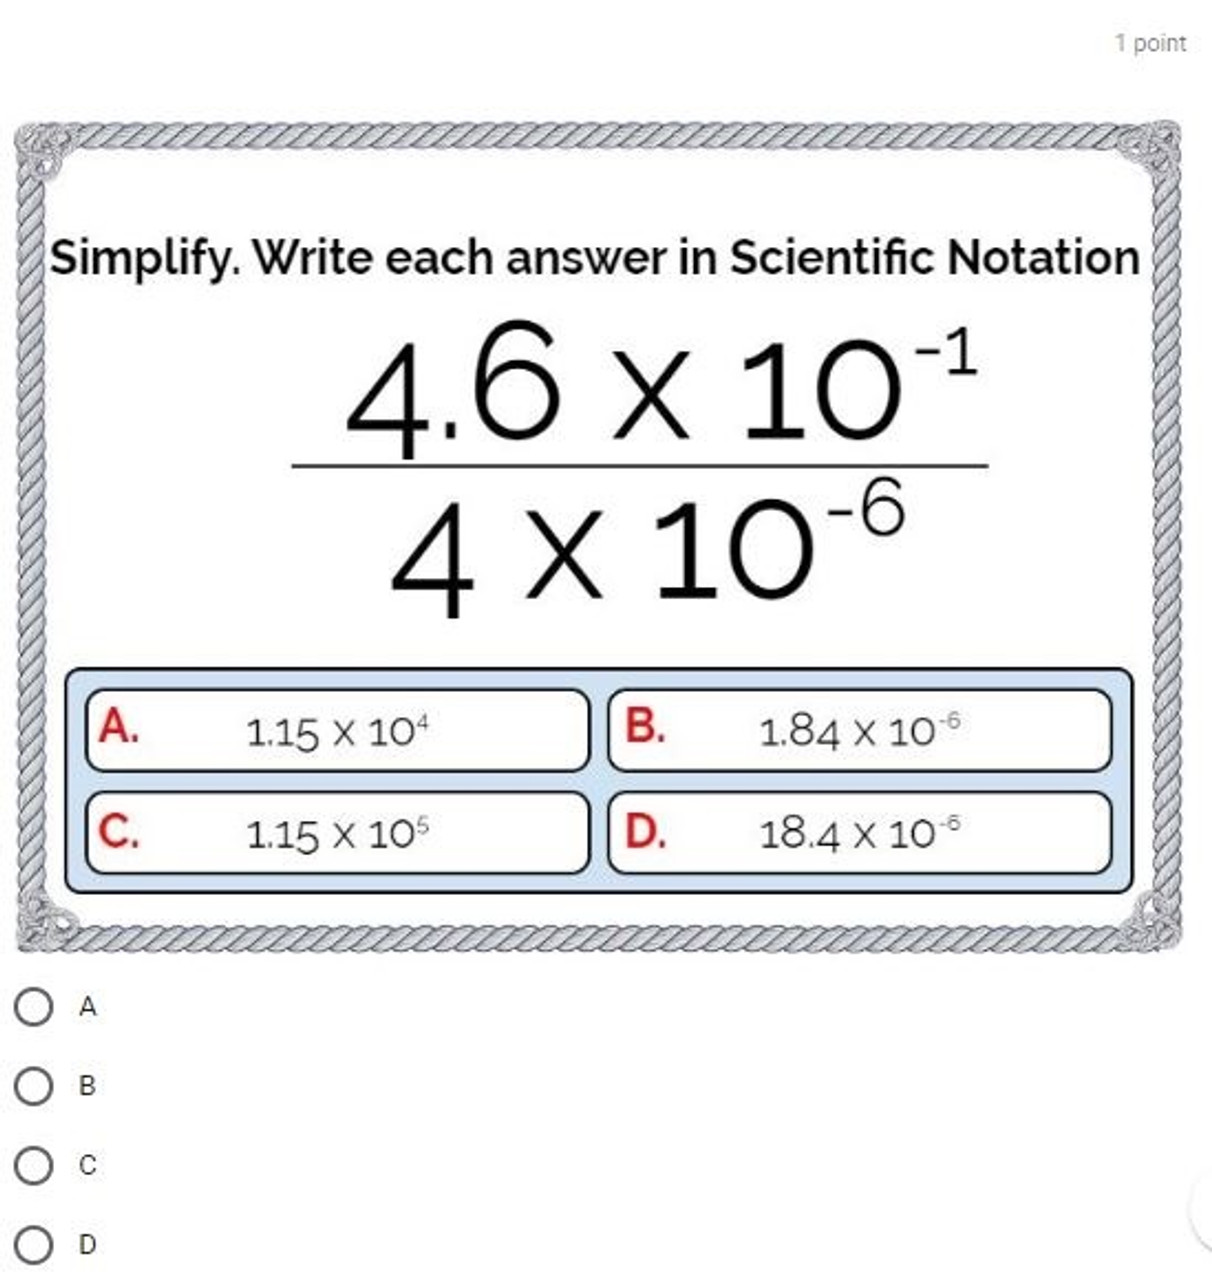 Operations with Numbers in Scientific Notation: Google Forms Quiz - 20 Problems